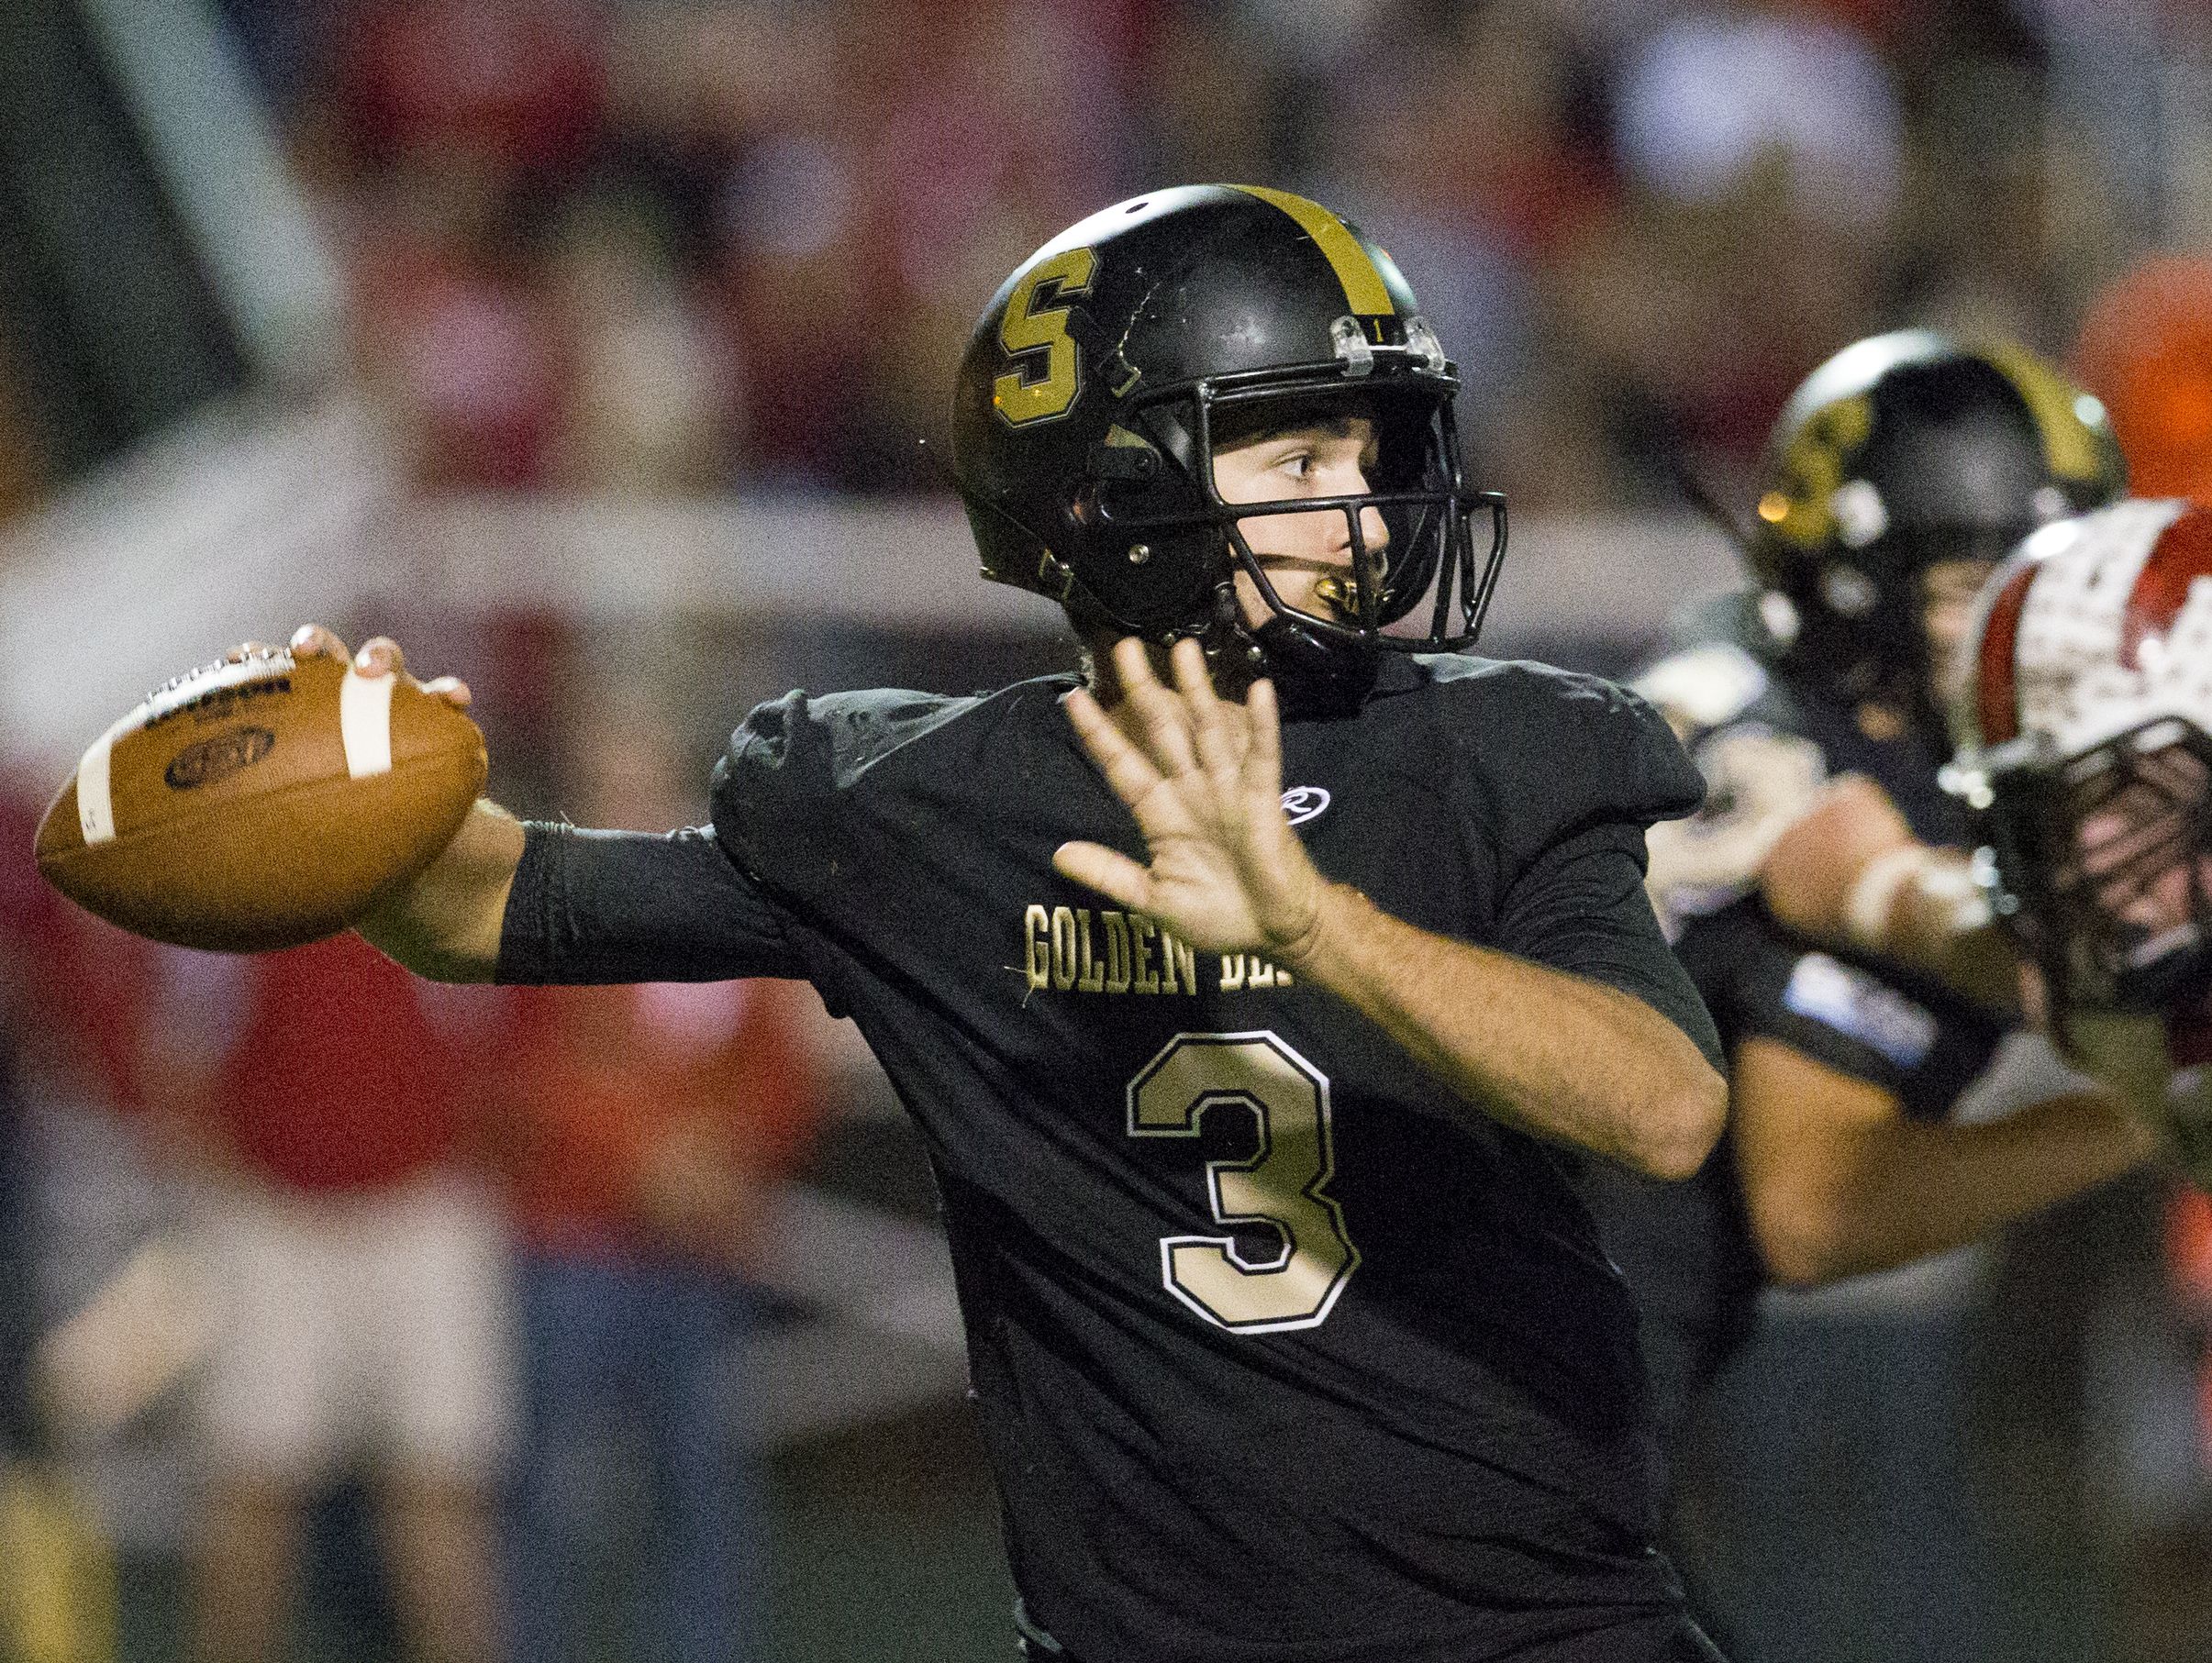 John Lux, quarterback for Shelbyville, throws during second quarter action, New Palestine High School at Shelbyville High School in a battle of unbeatens, Shelbyville, Friday, Sept. 30, 2016.